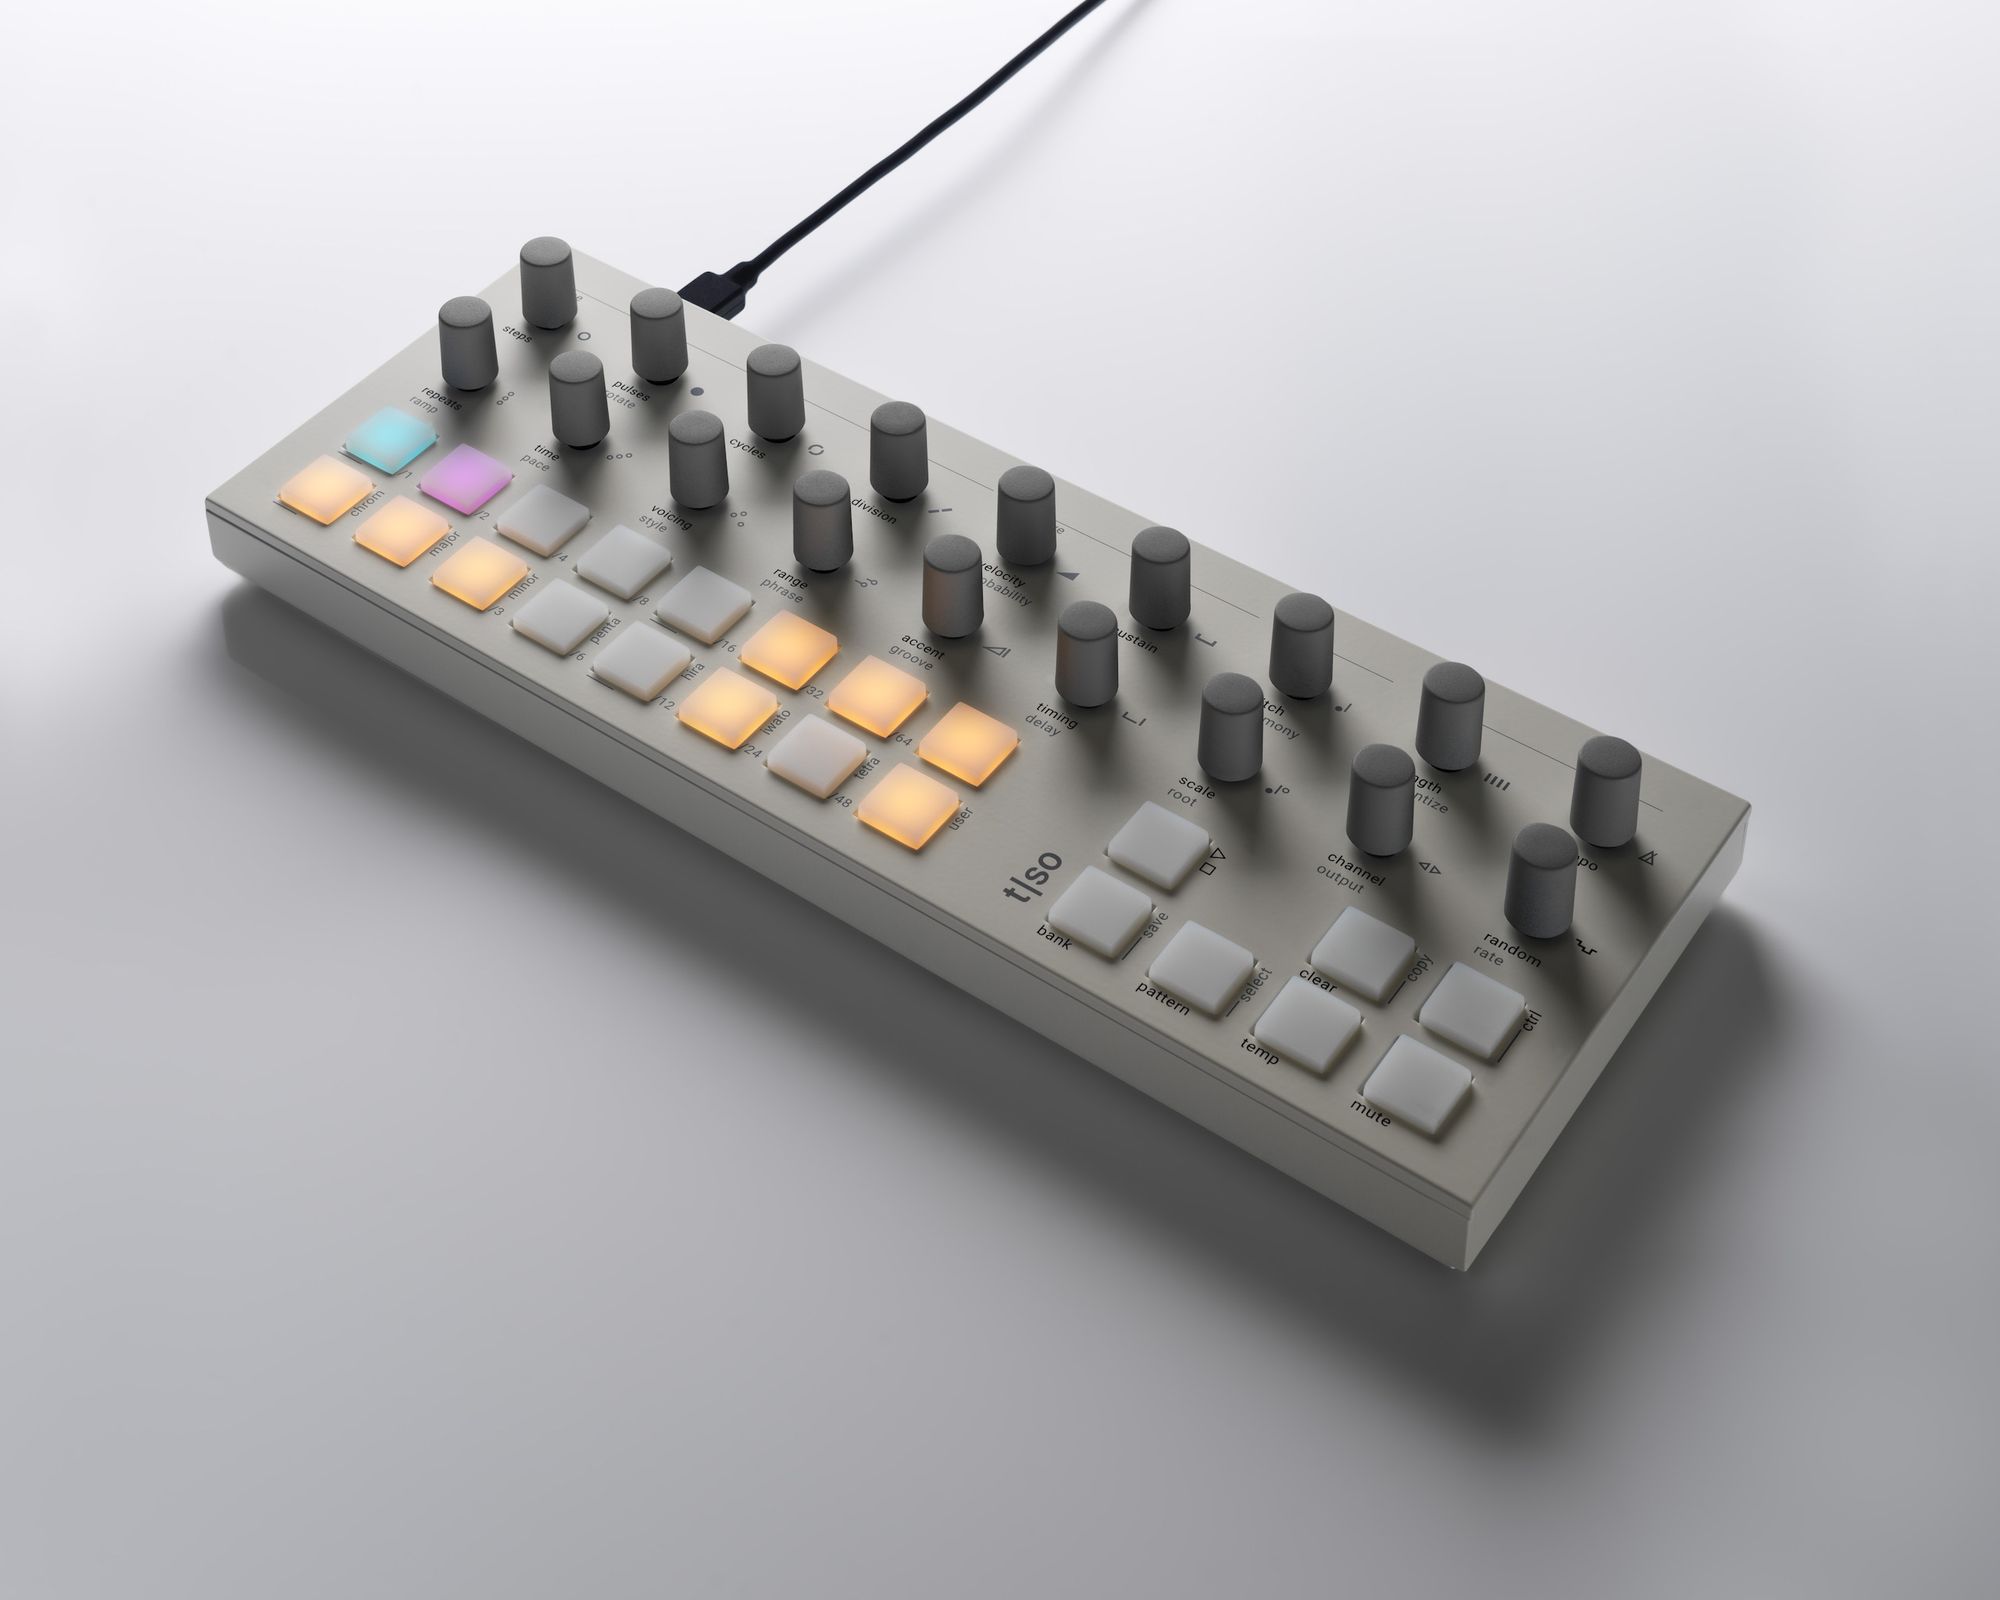 Limited edition Torso T-1 algorithmic sequencer in white